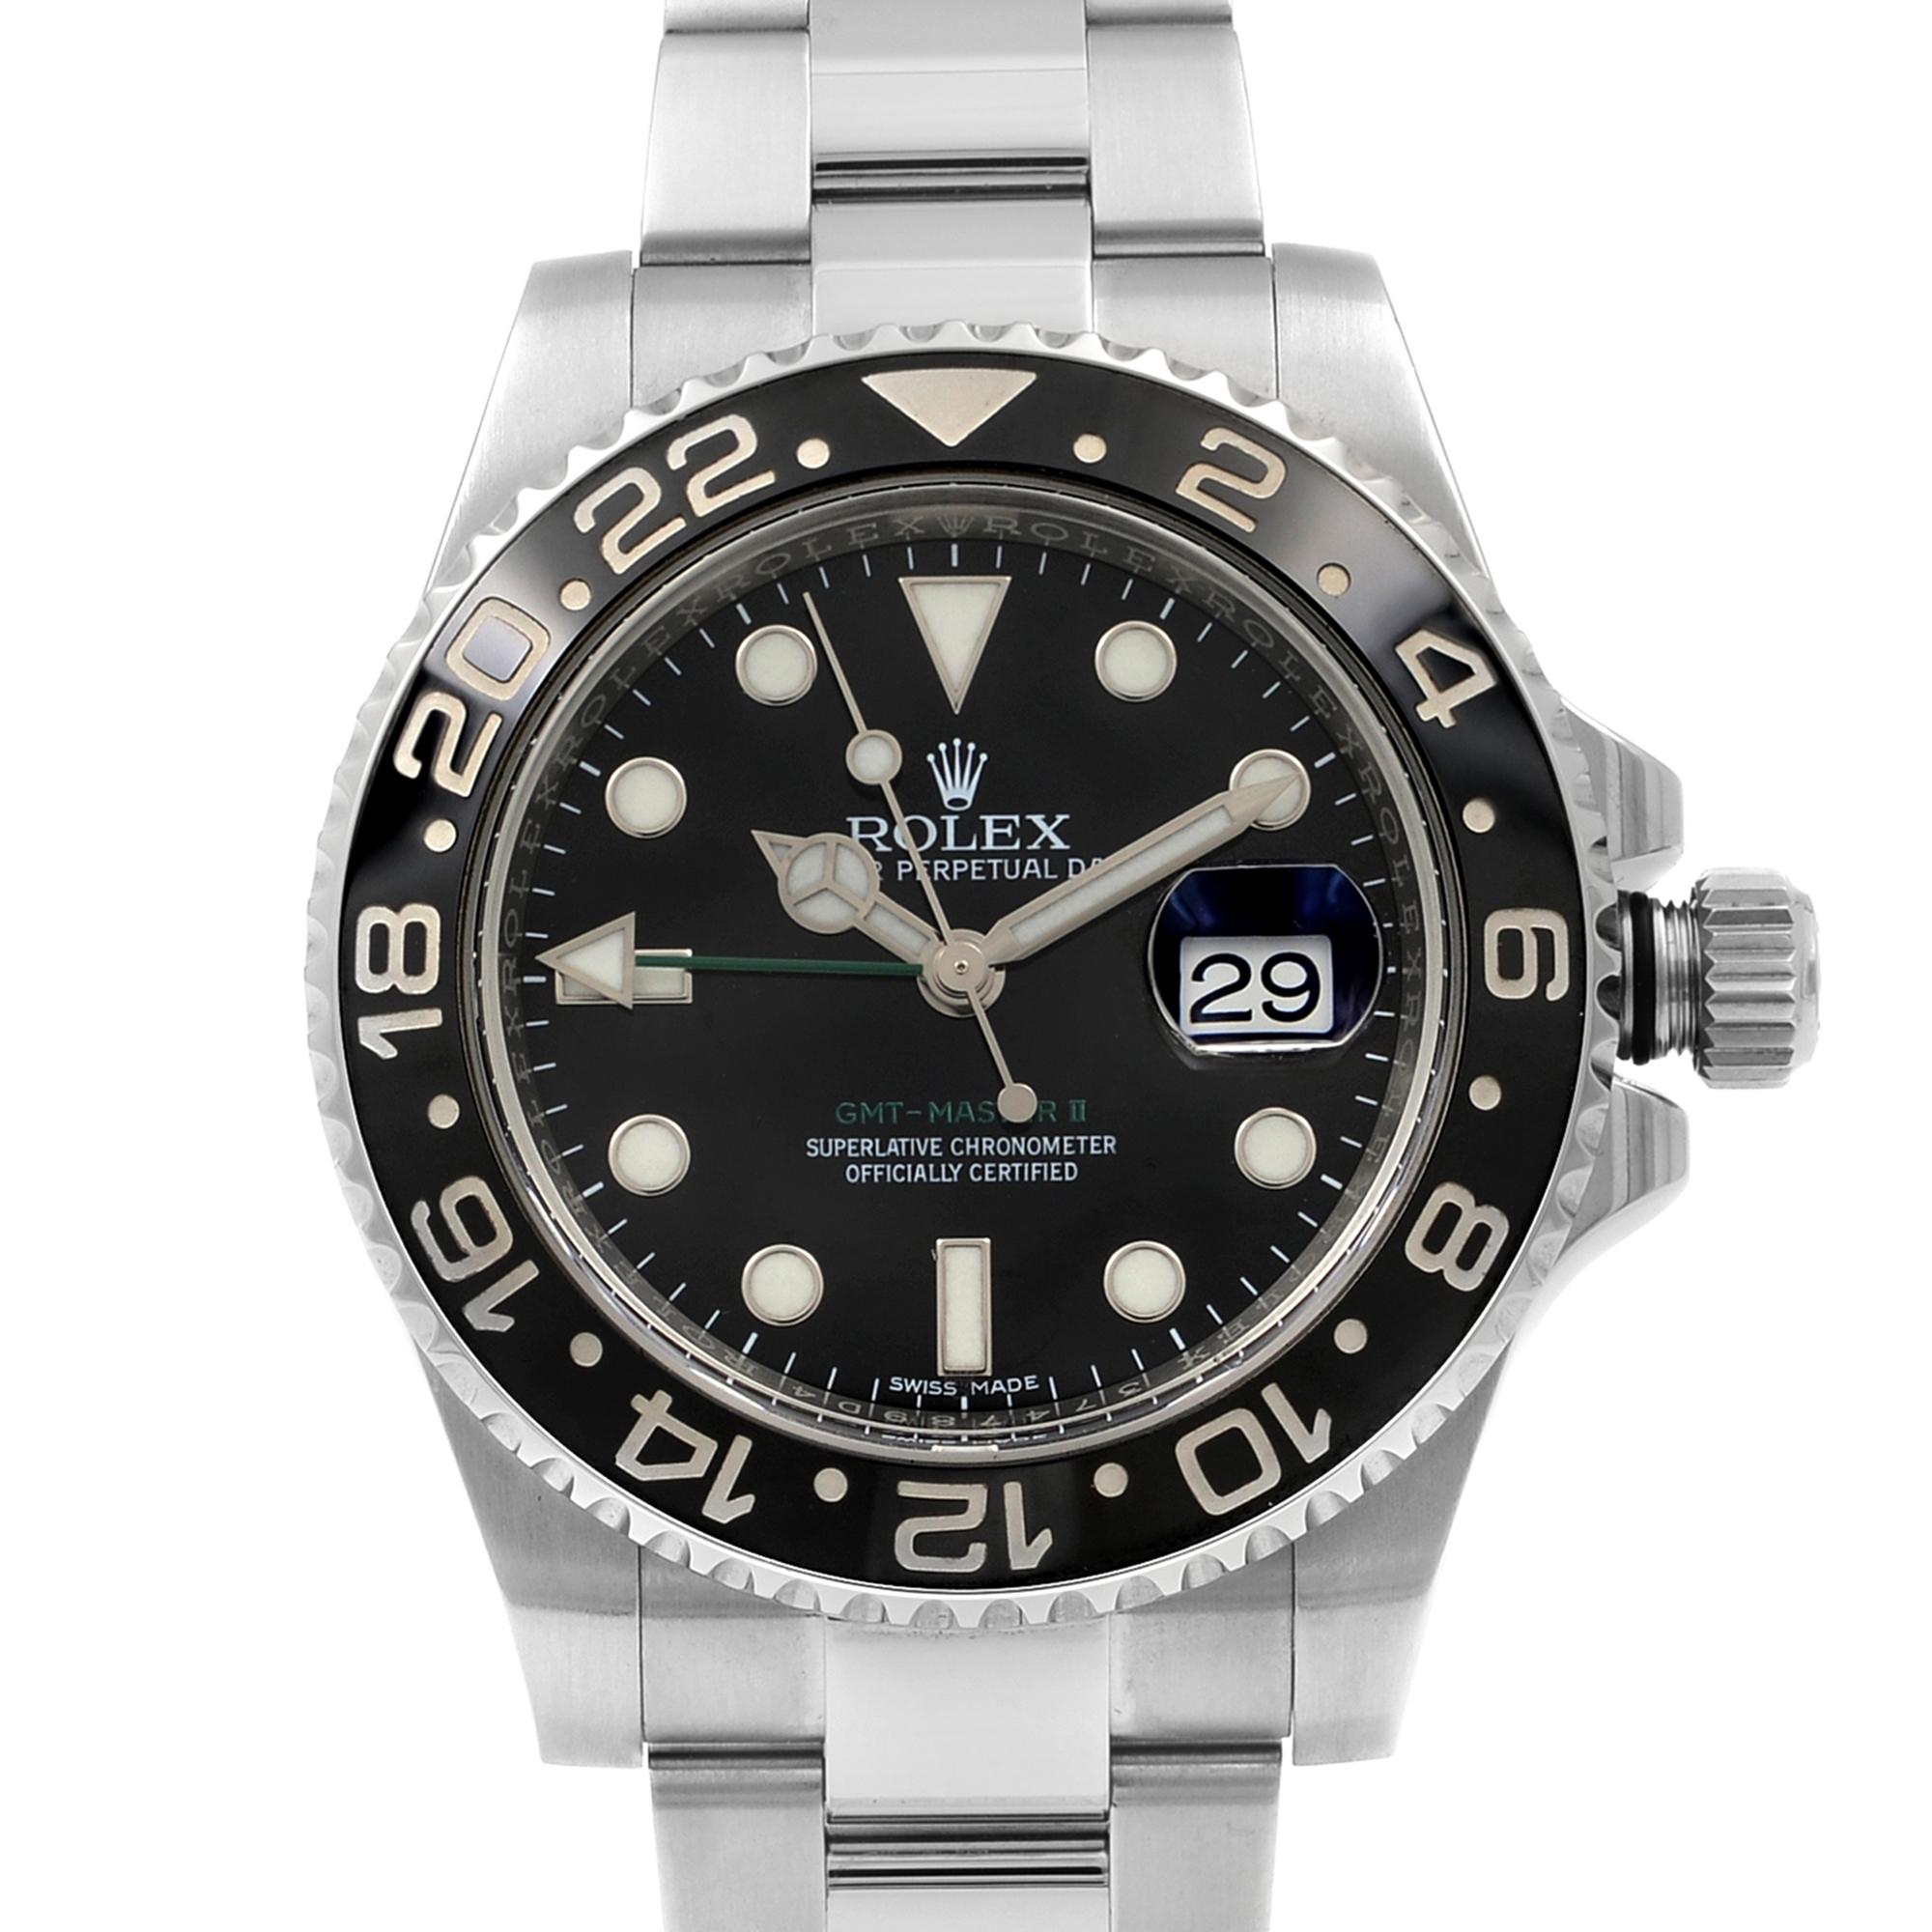 This pre-owned Rolex GMT-Master II 116710 is a beautiful men's timepiece that is powered by mechanical (automatic) movement which is cased in a stainless steel case. It has a round shape face, gmt, date indicator dial and has hand sticks & dots